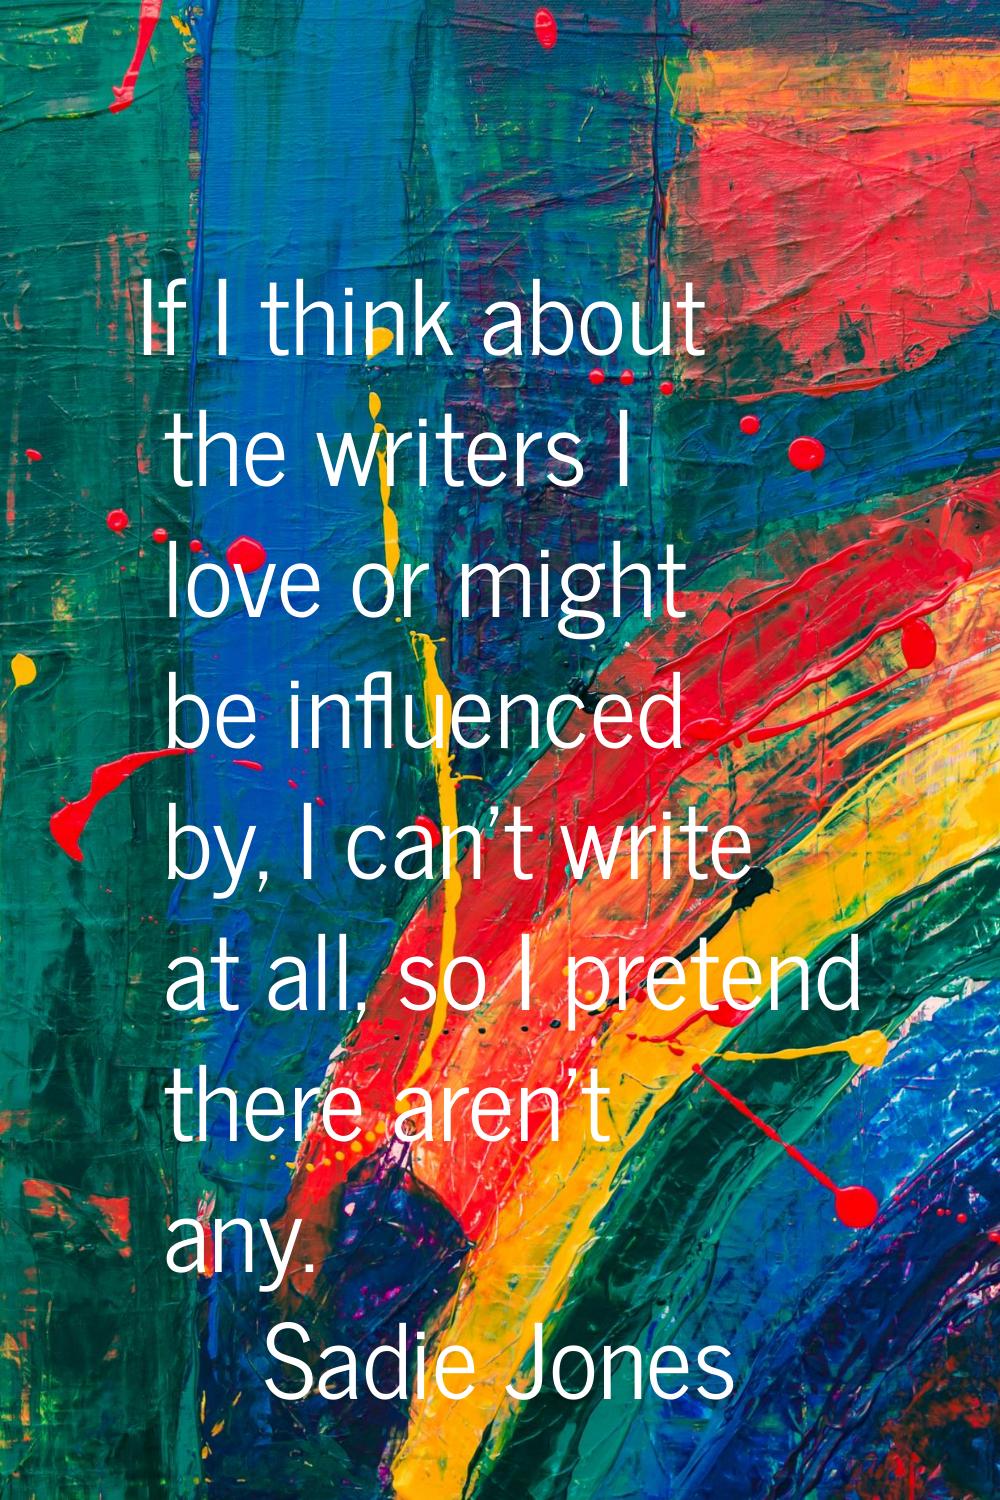 If I think about the writers I love or might be influenced by, I can't write at all, so I pretend t